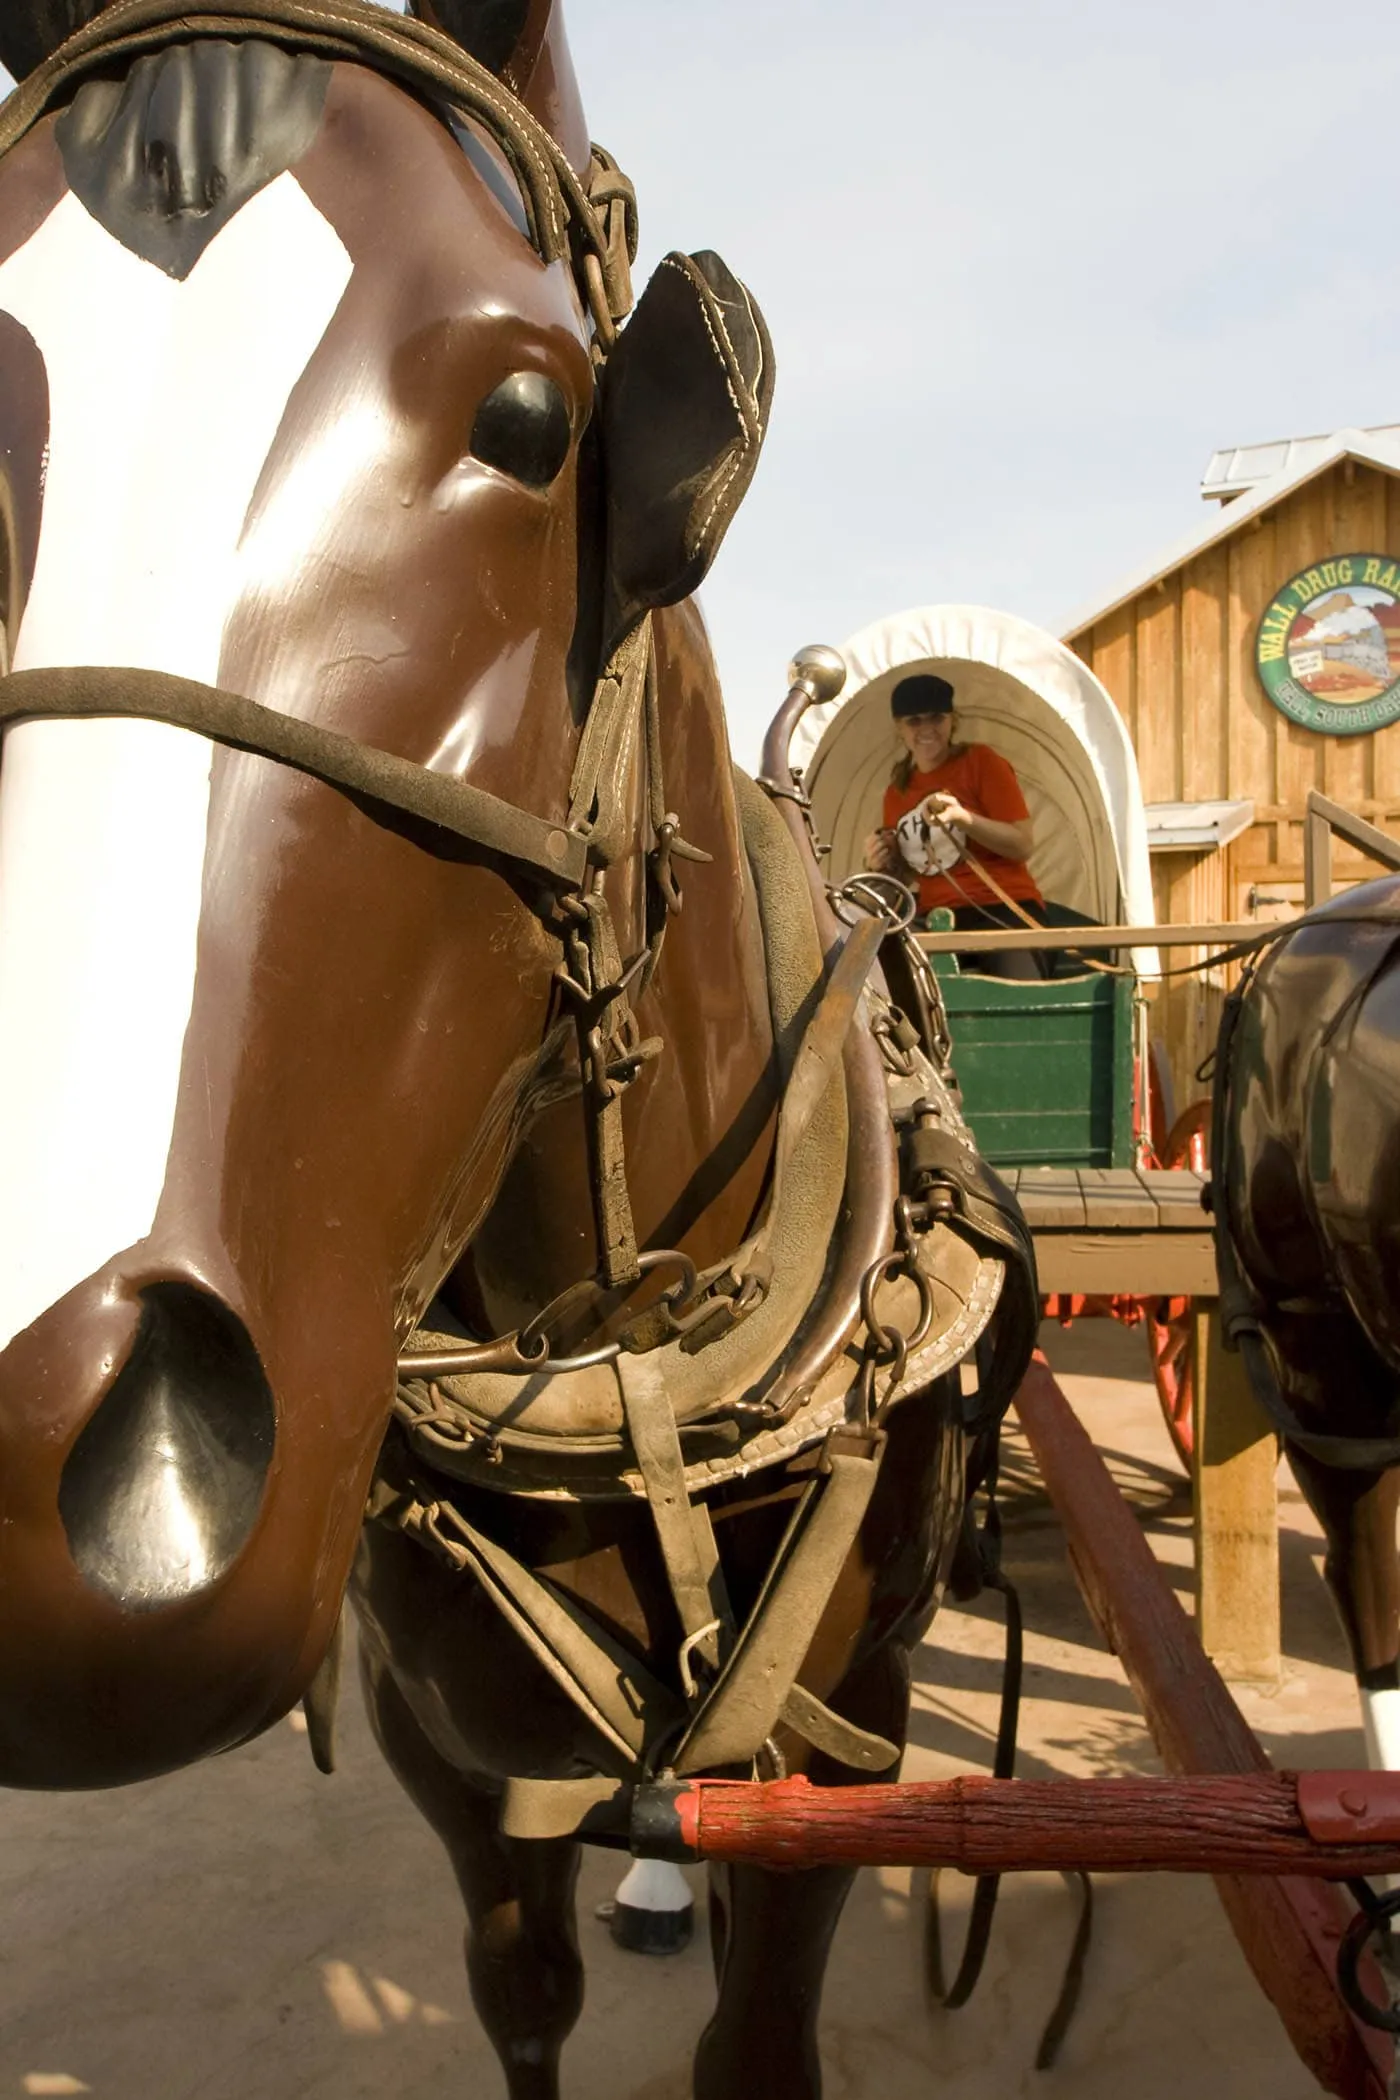 Horse and Carriage Replica at Wall Drug Store in Wall, South Dakota